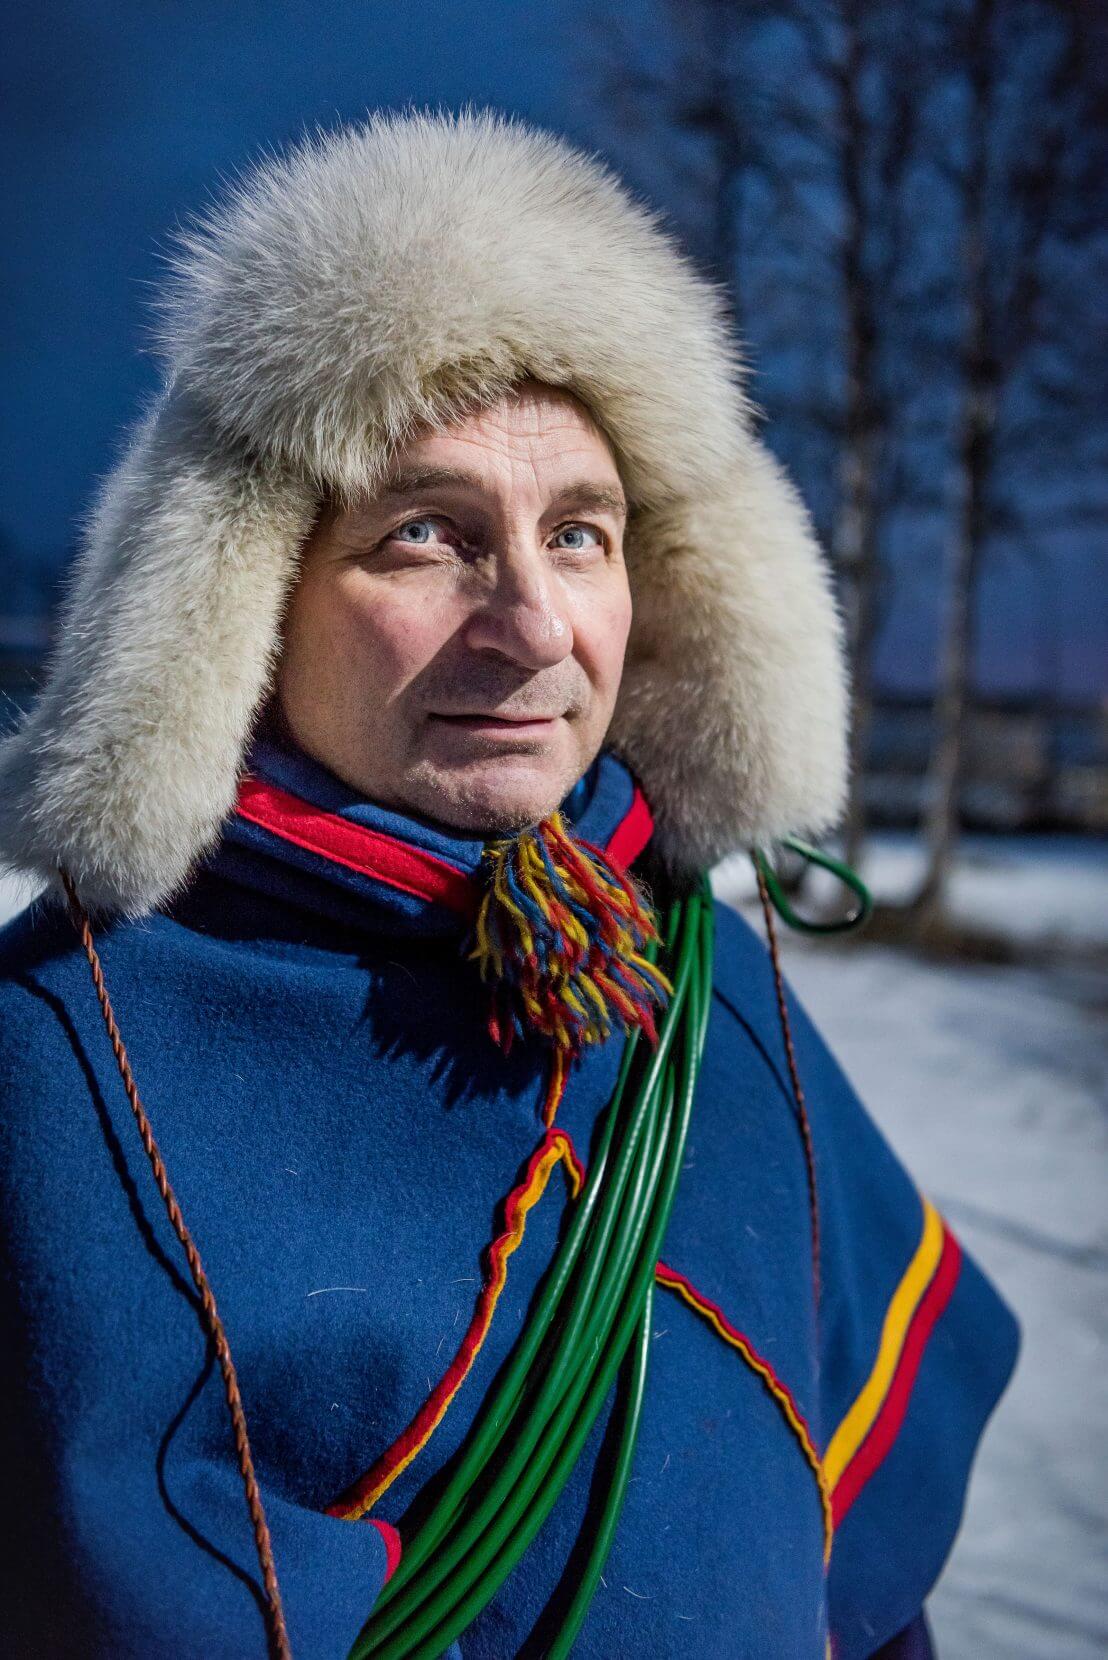 Sámi man To block the wind of northern Sweden, Sámi reindeer herder Nils Torbjörn Nutti wears a poncho-like luhkka on the job. His red and yellow stitching identify that he comes from the Karesuando region in northernmost Sweden.